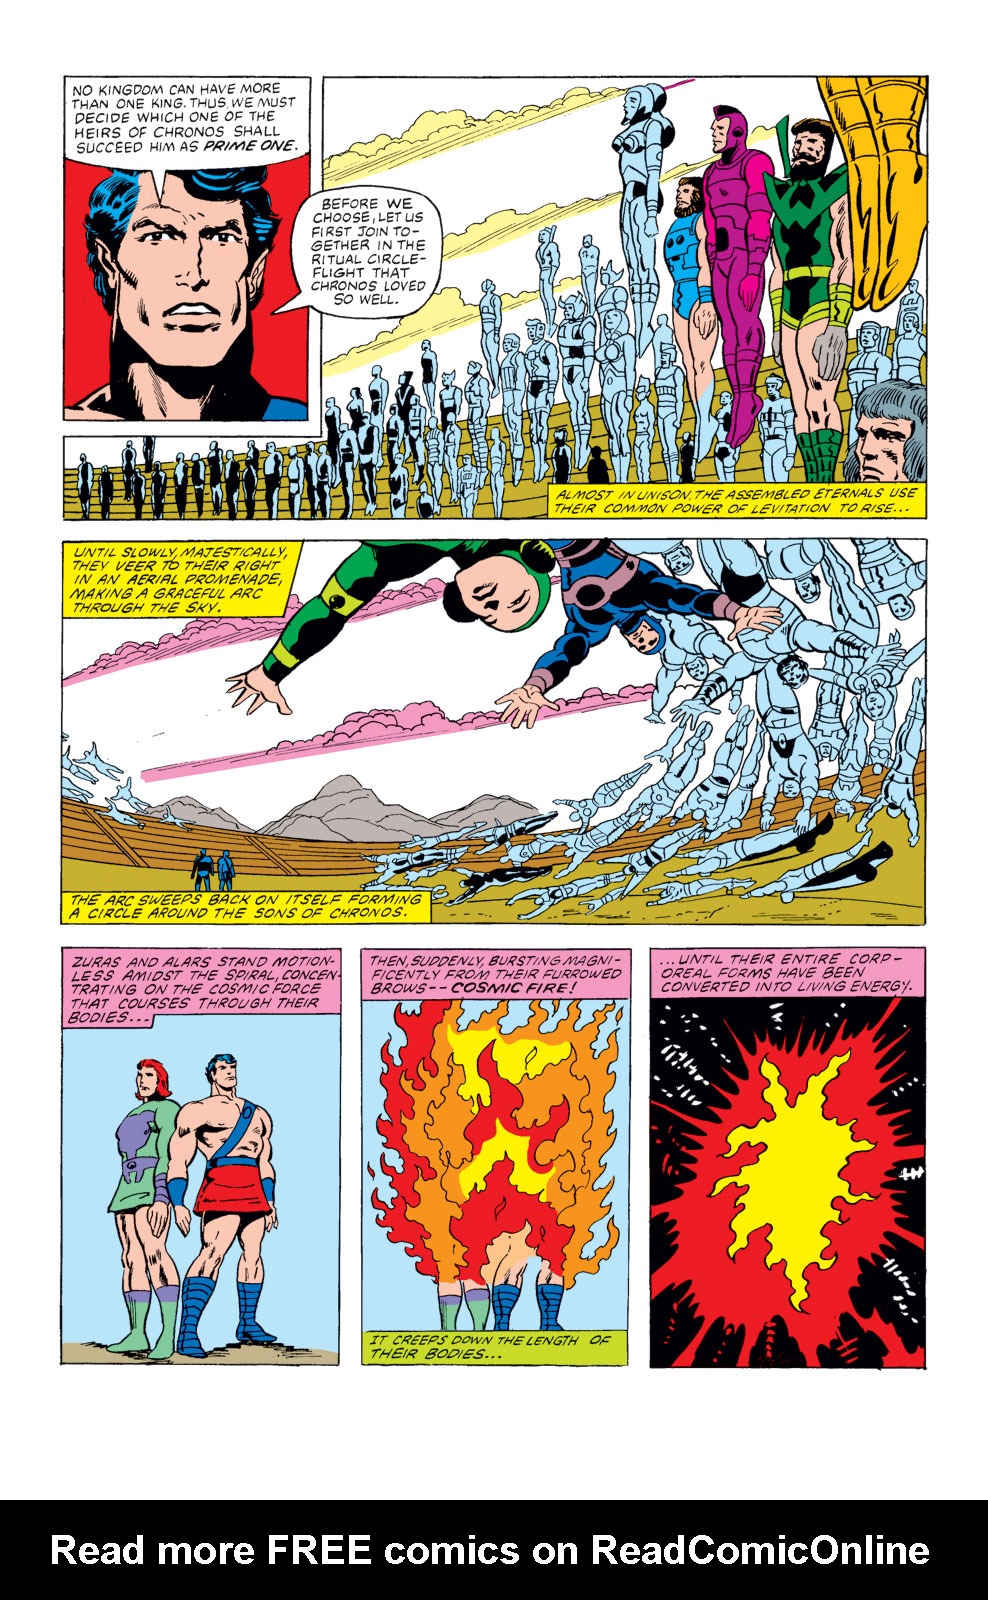 What If? (1977) issue 25 - Thor and the Avengers battled the gods - Page 37